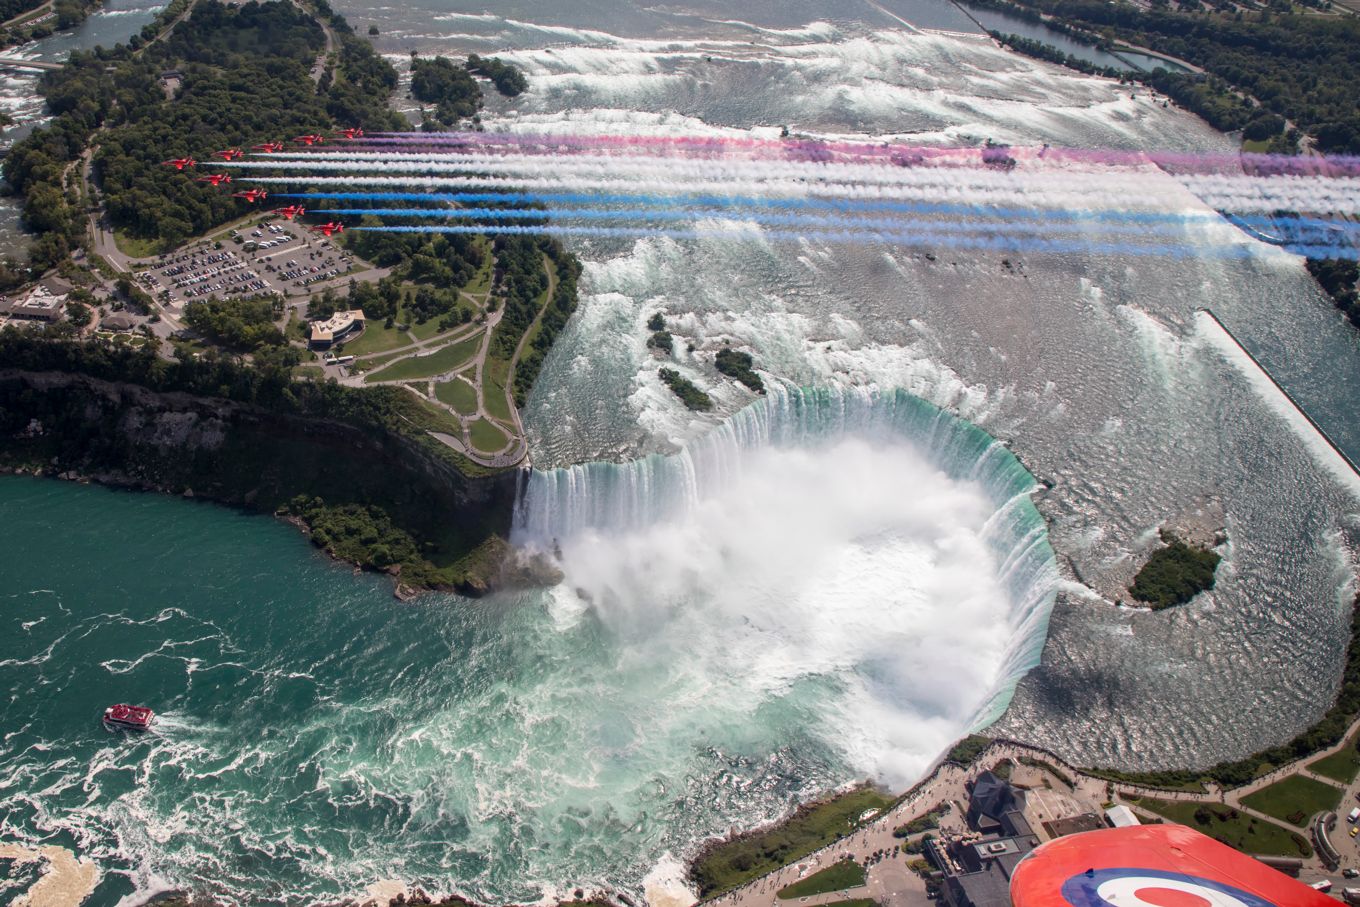 The Red Arrows over the Niagara Falls in 2019.